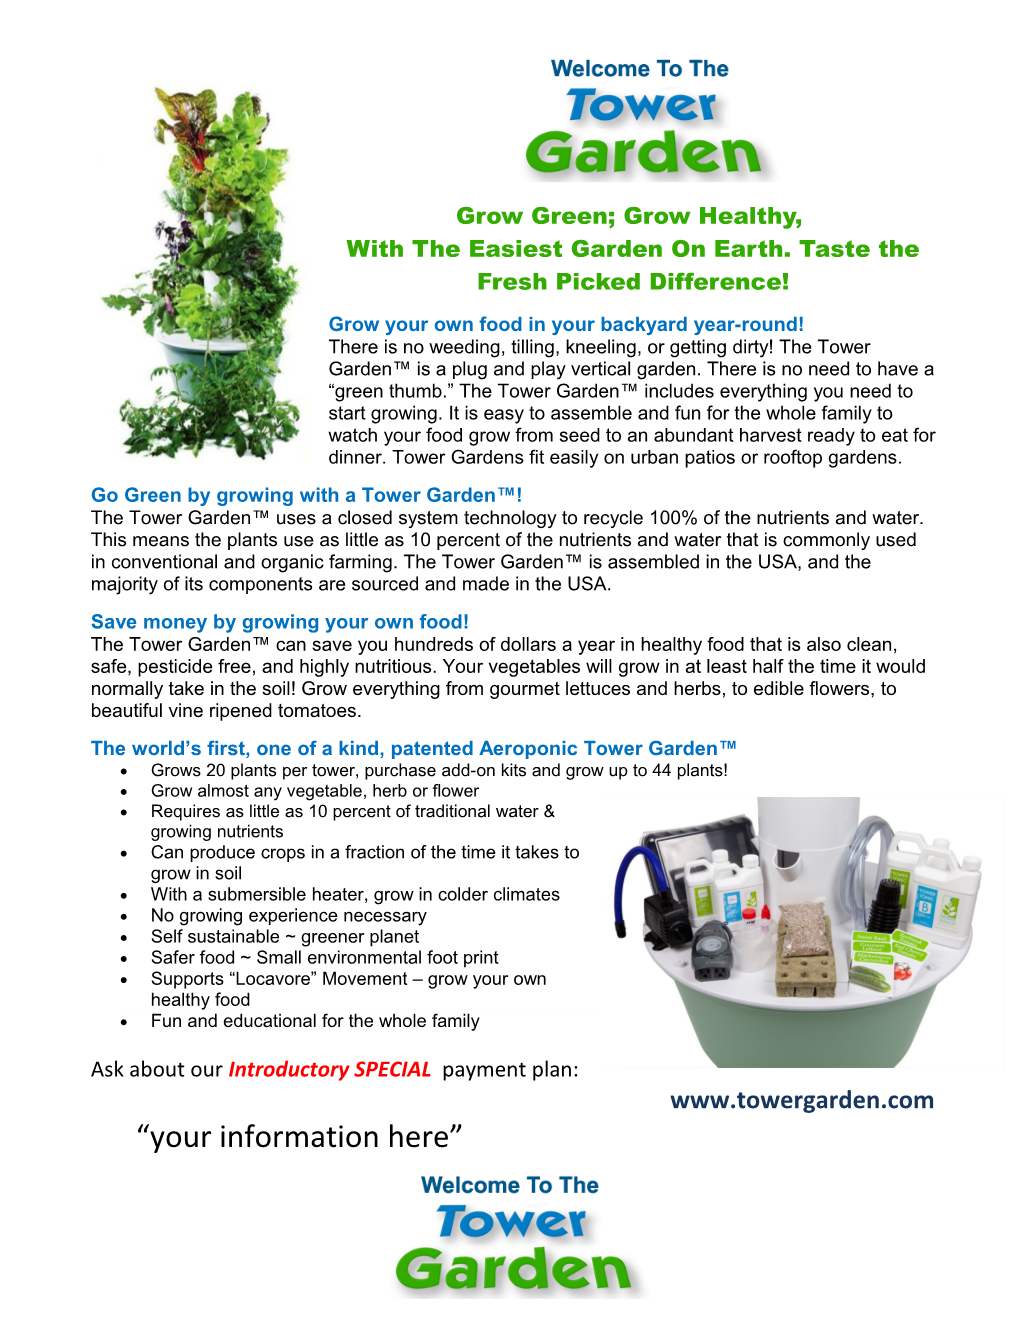 Grow Your Own Food in Your Backyard Year-Round!